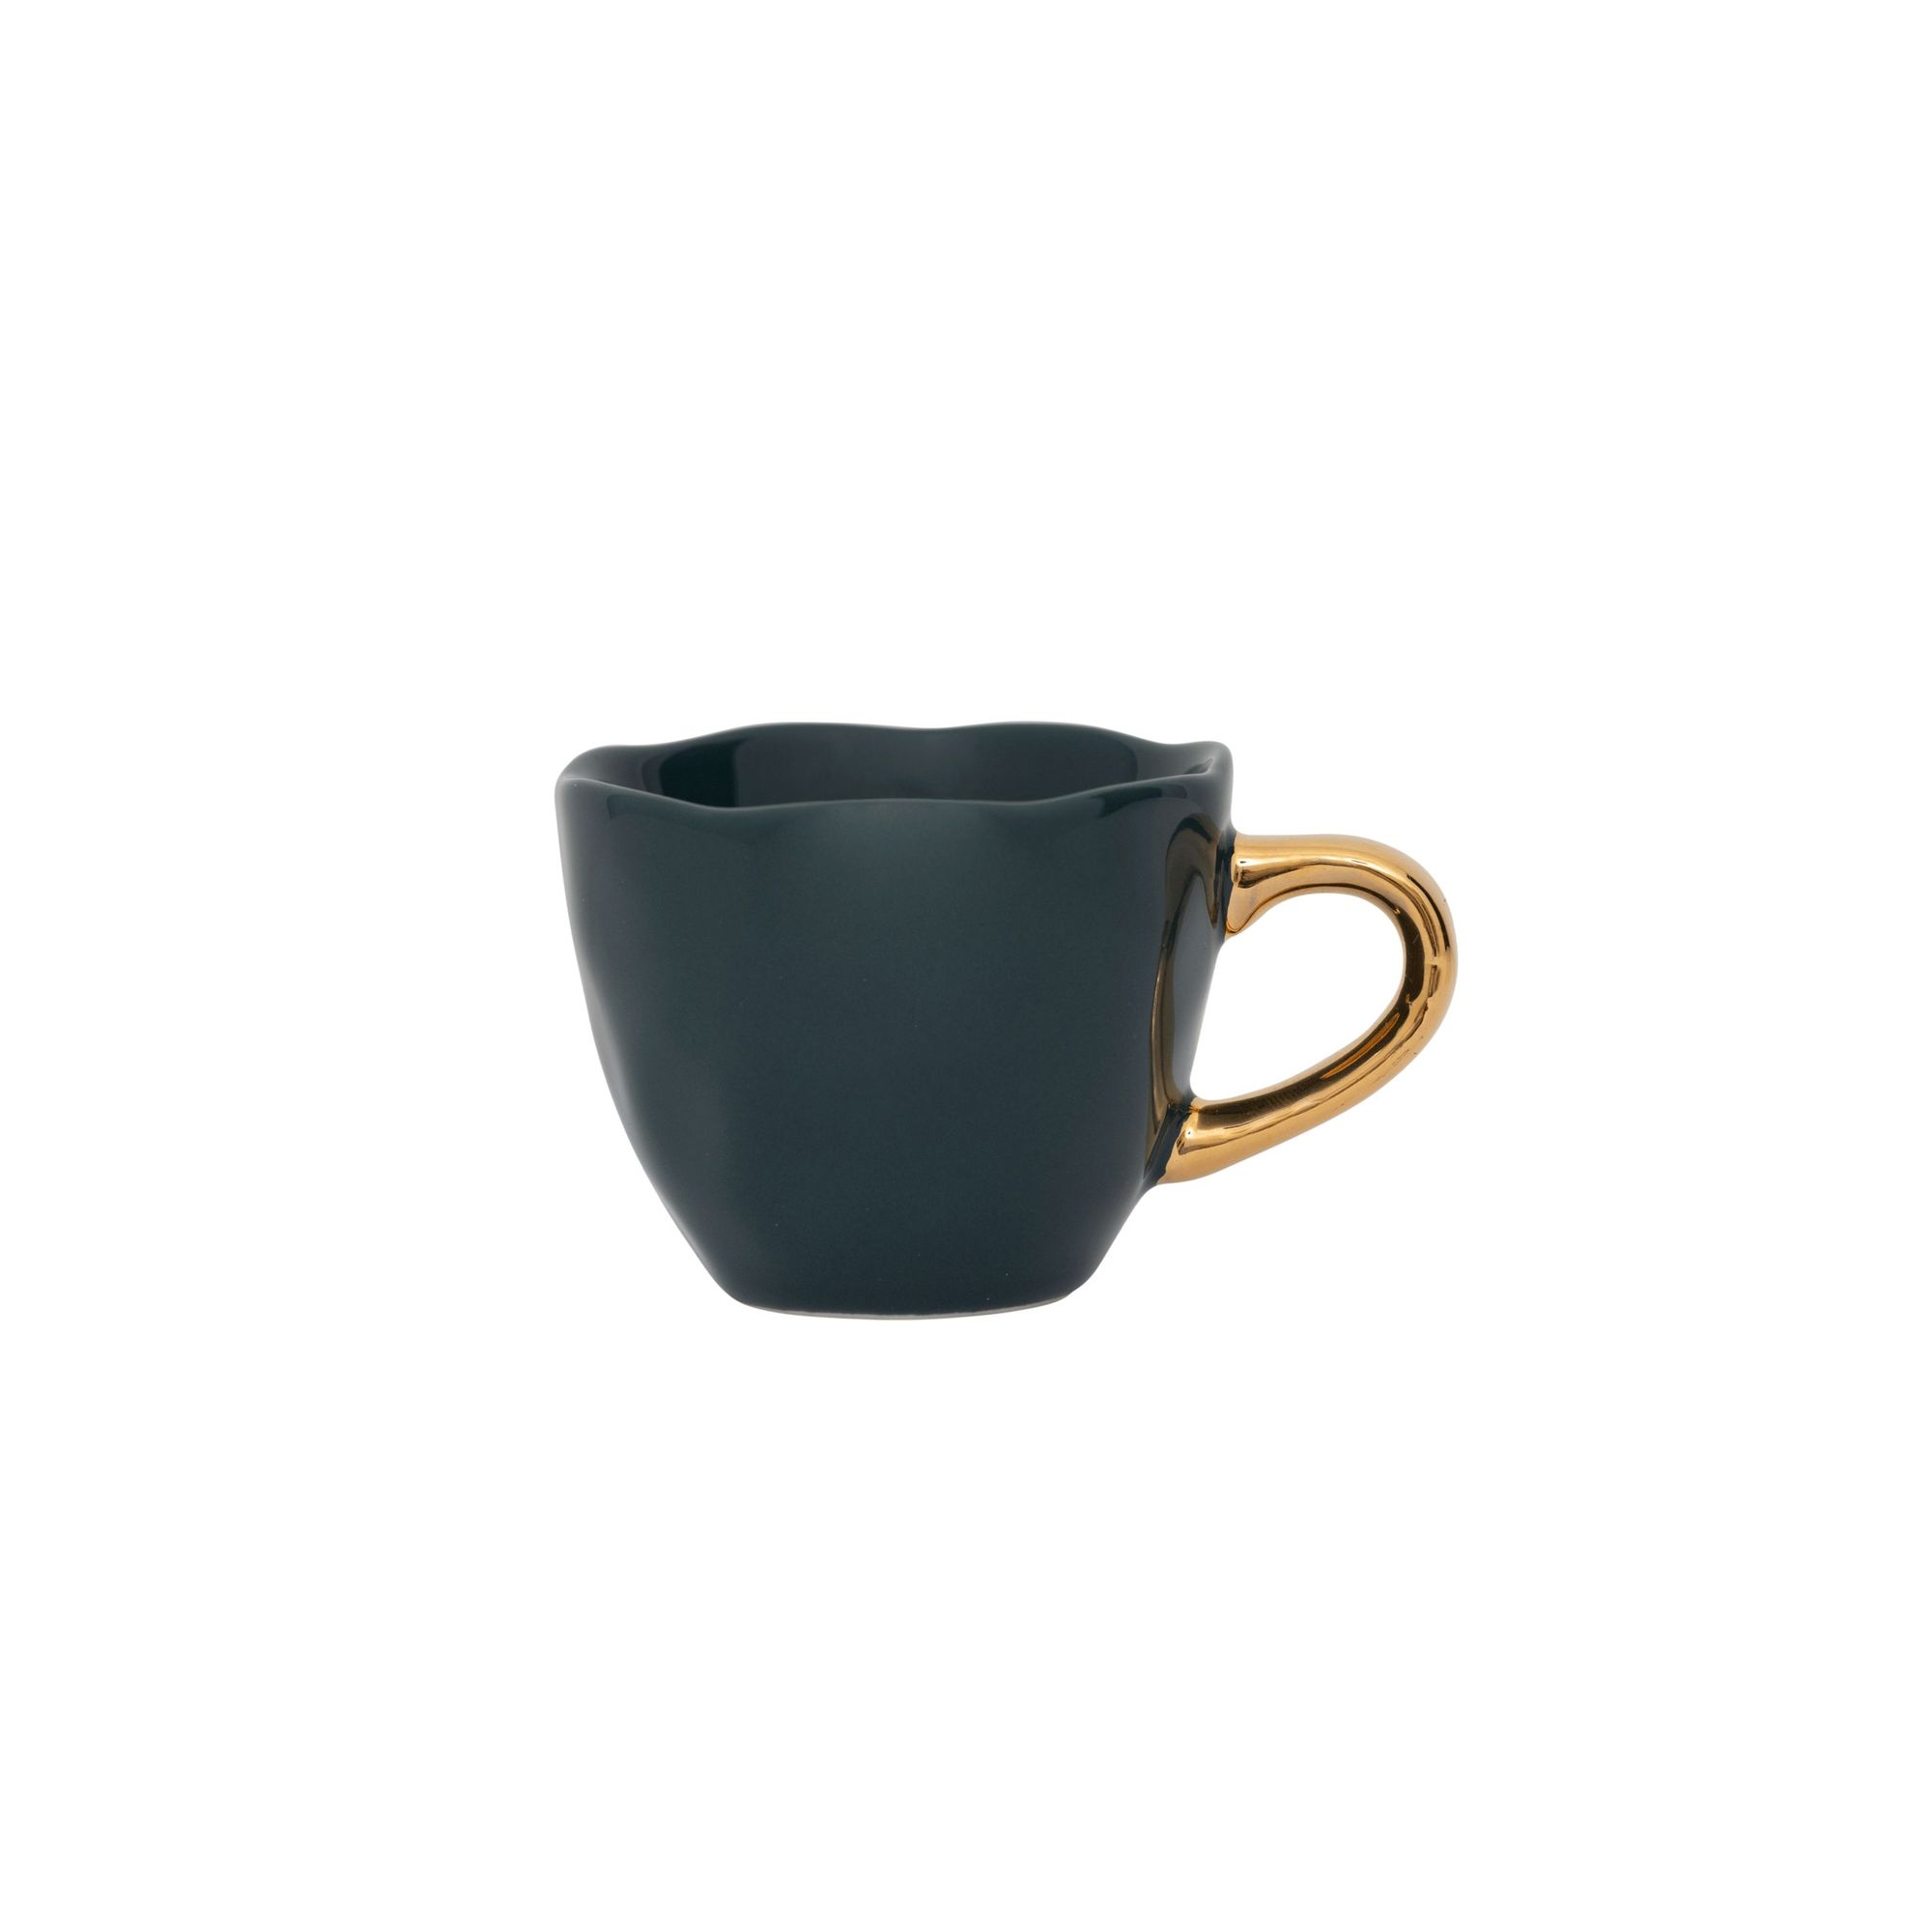 Unc Good Morning Cup Espresso Blue Green Gift